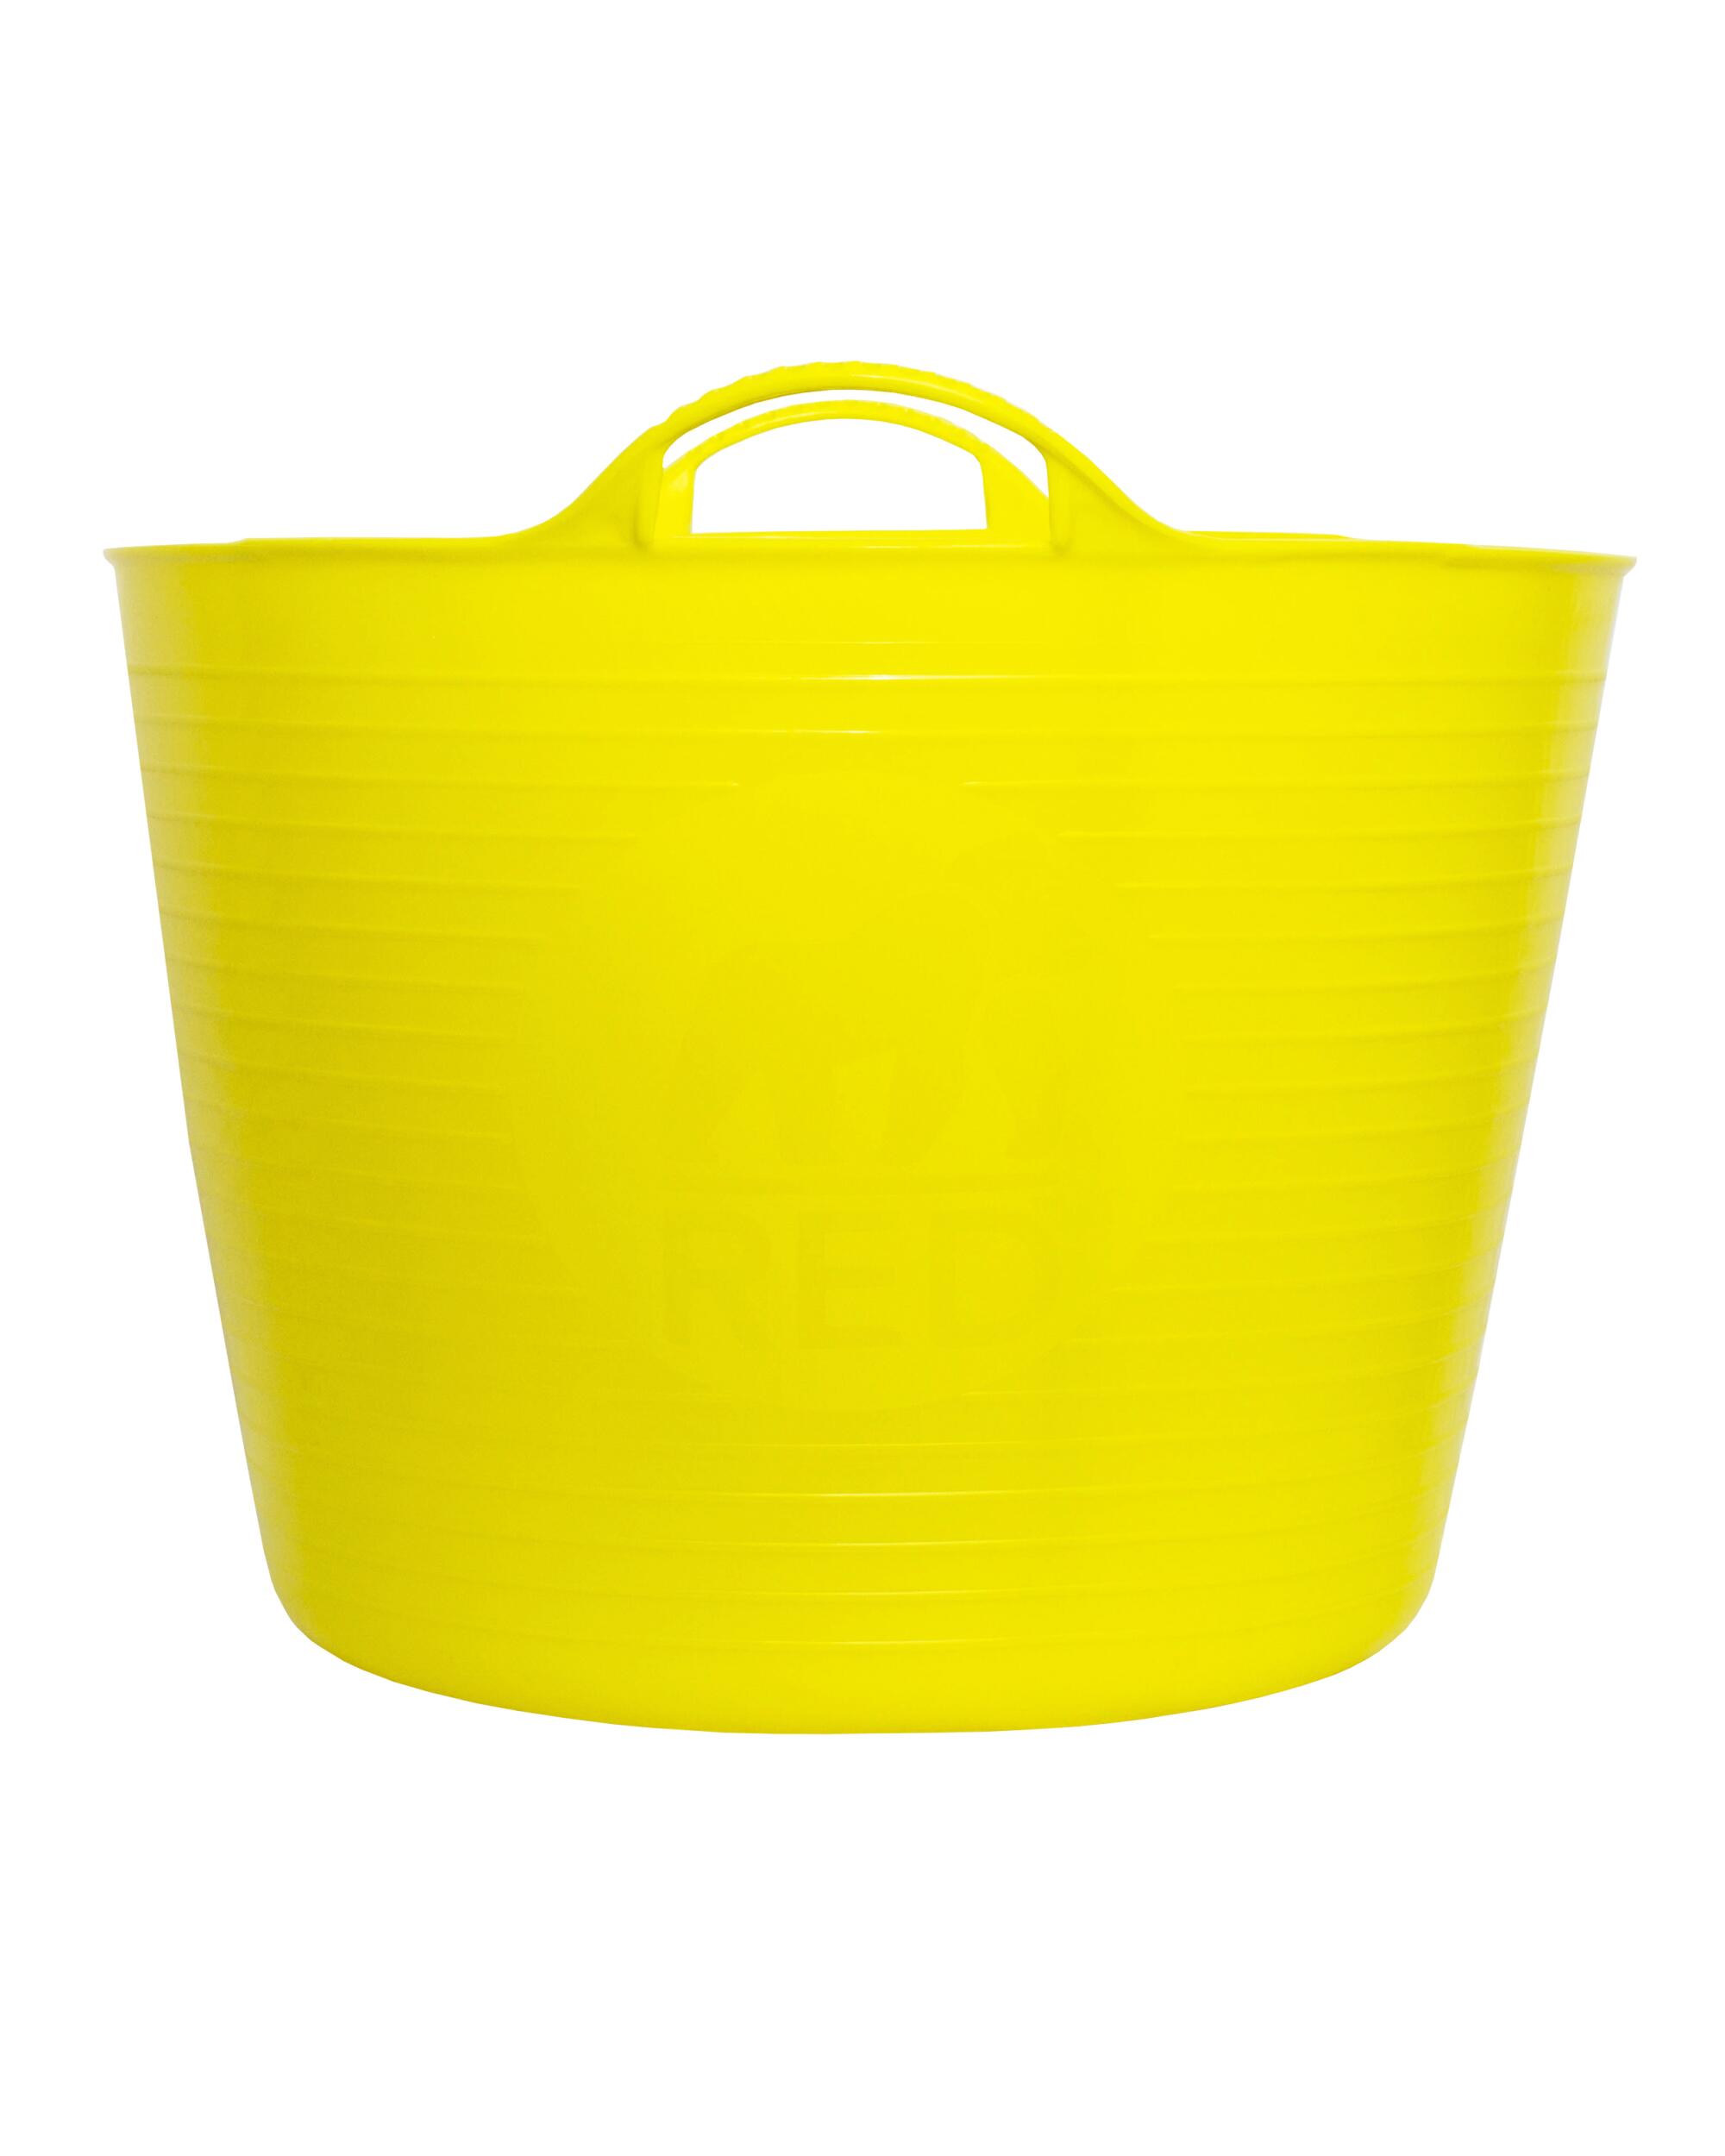 A yellow 10-gallon tub by Red Gorilla